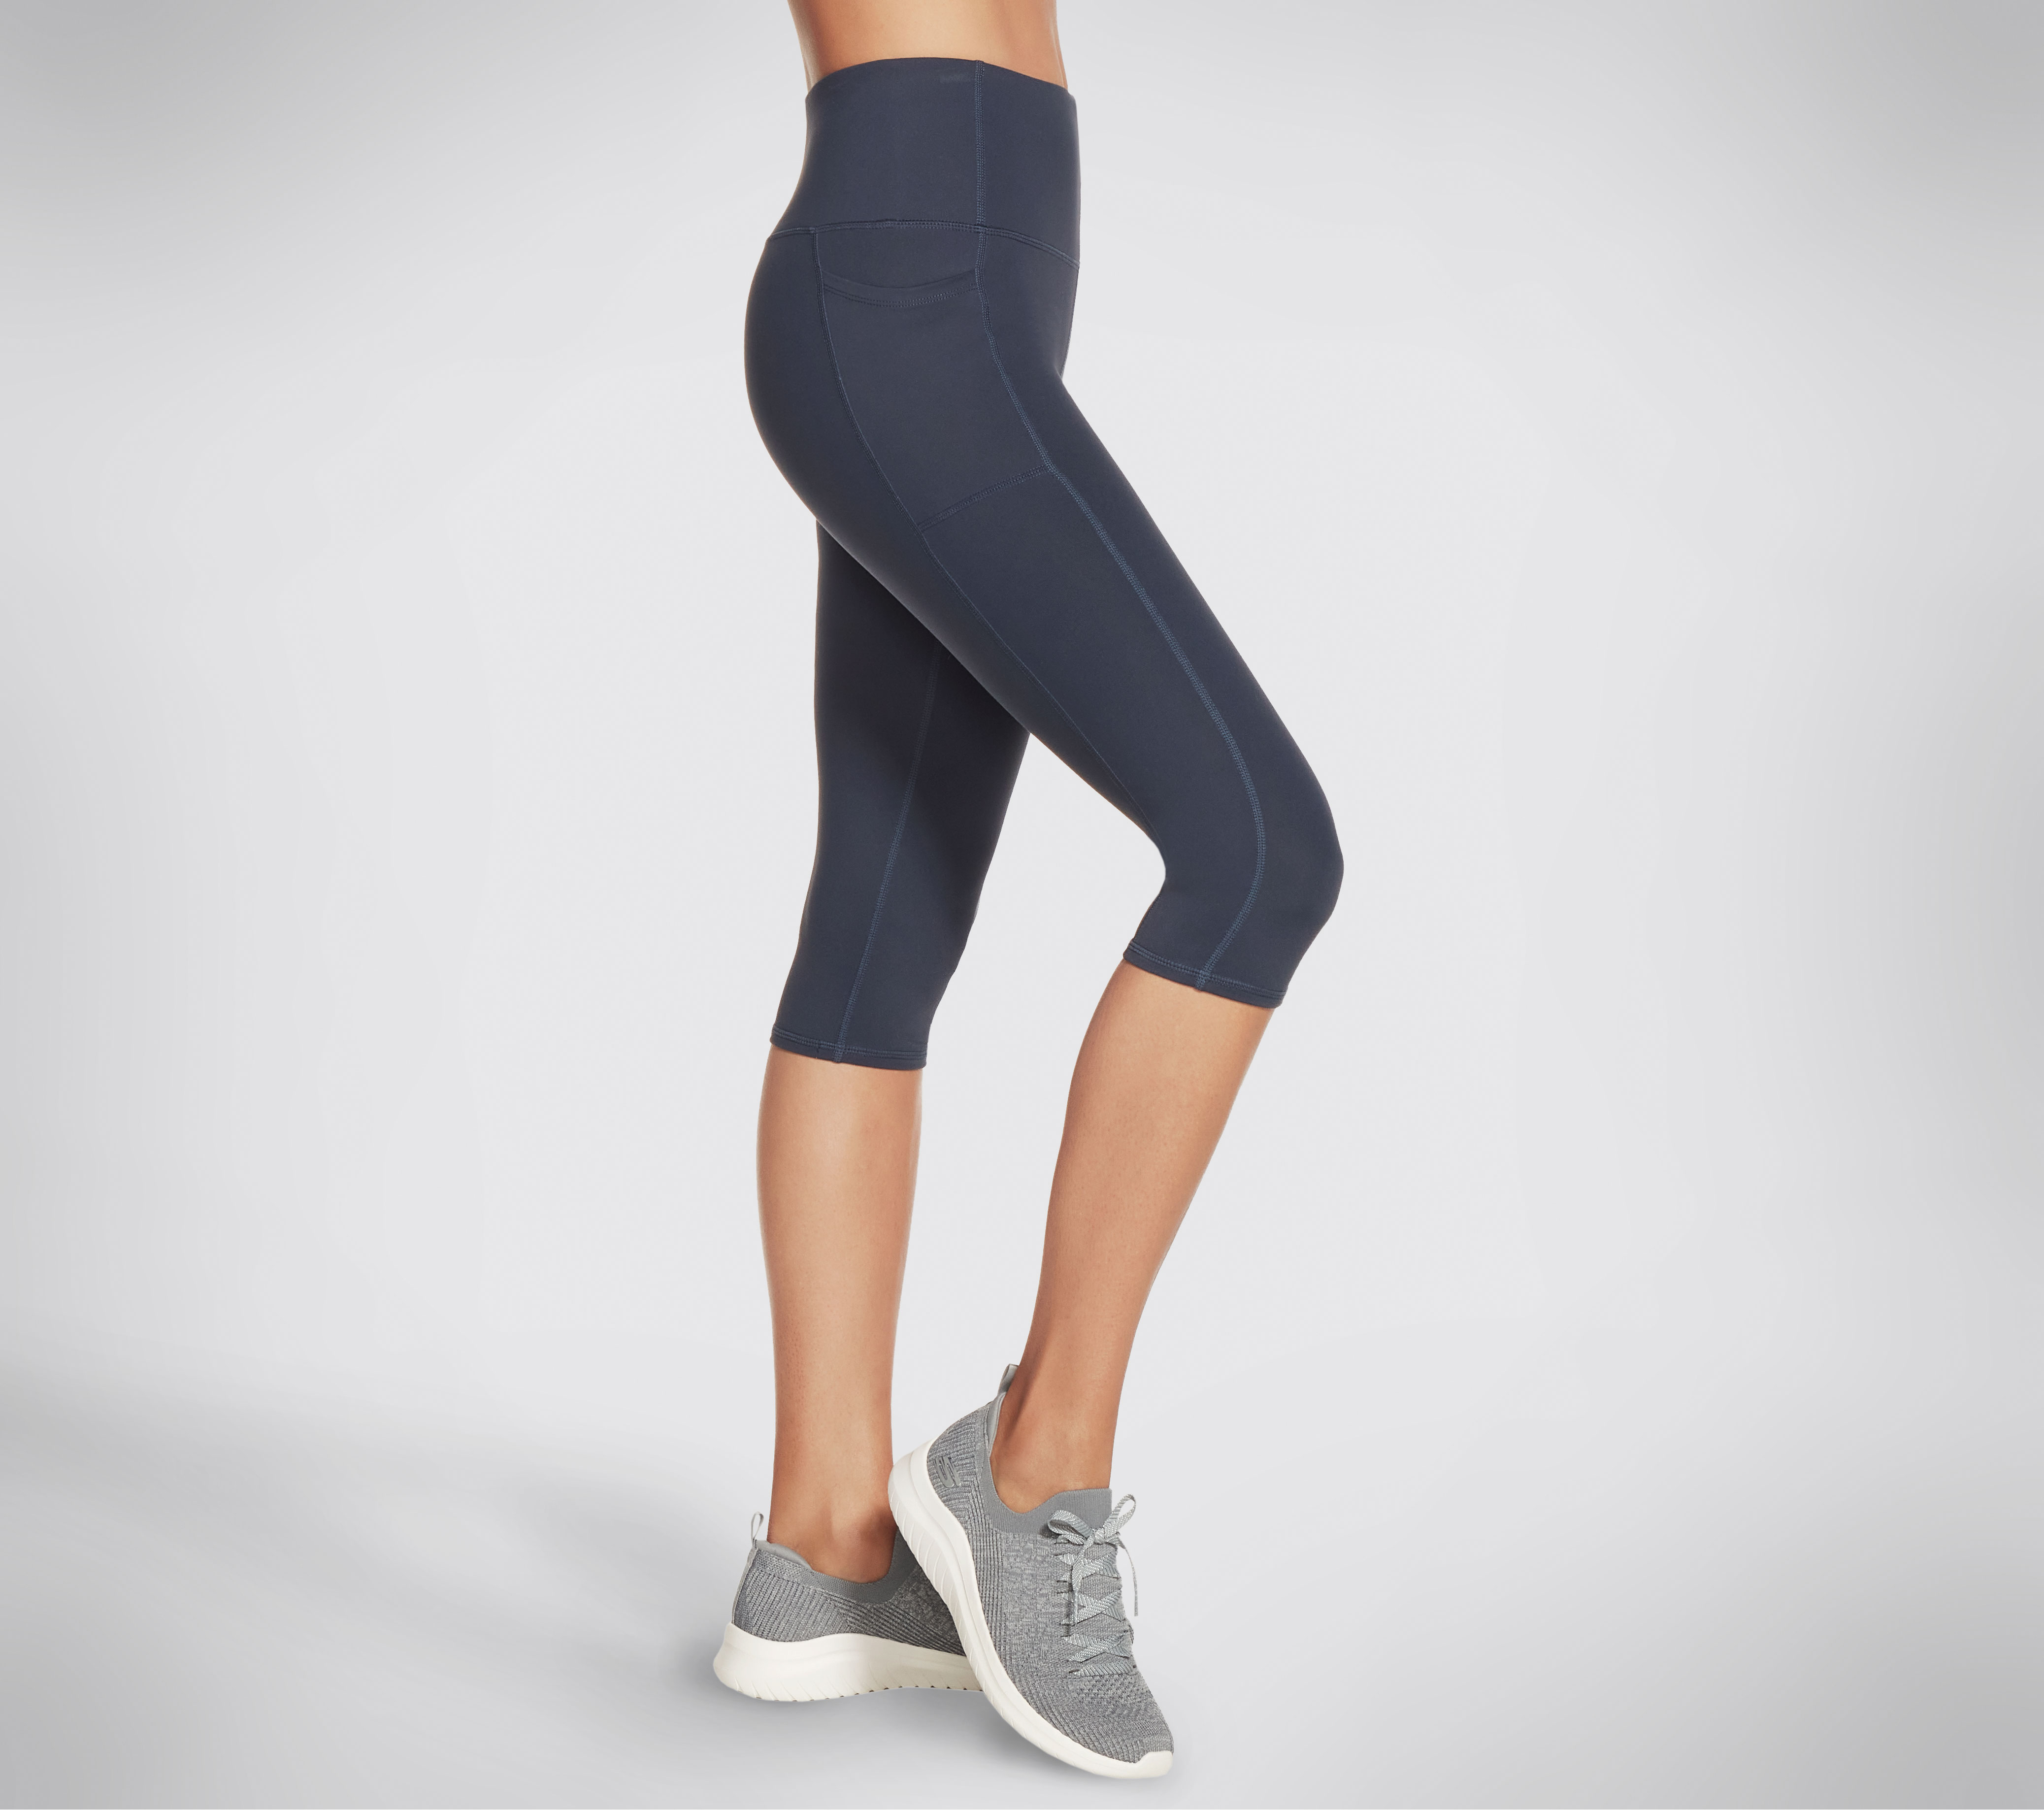 Sketchers GOWALK high waisted leggings with pockets